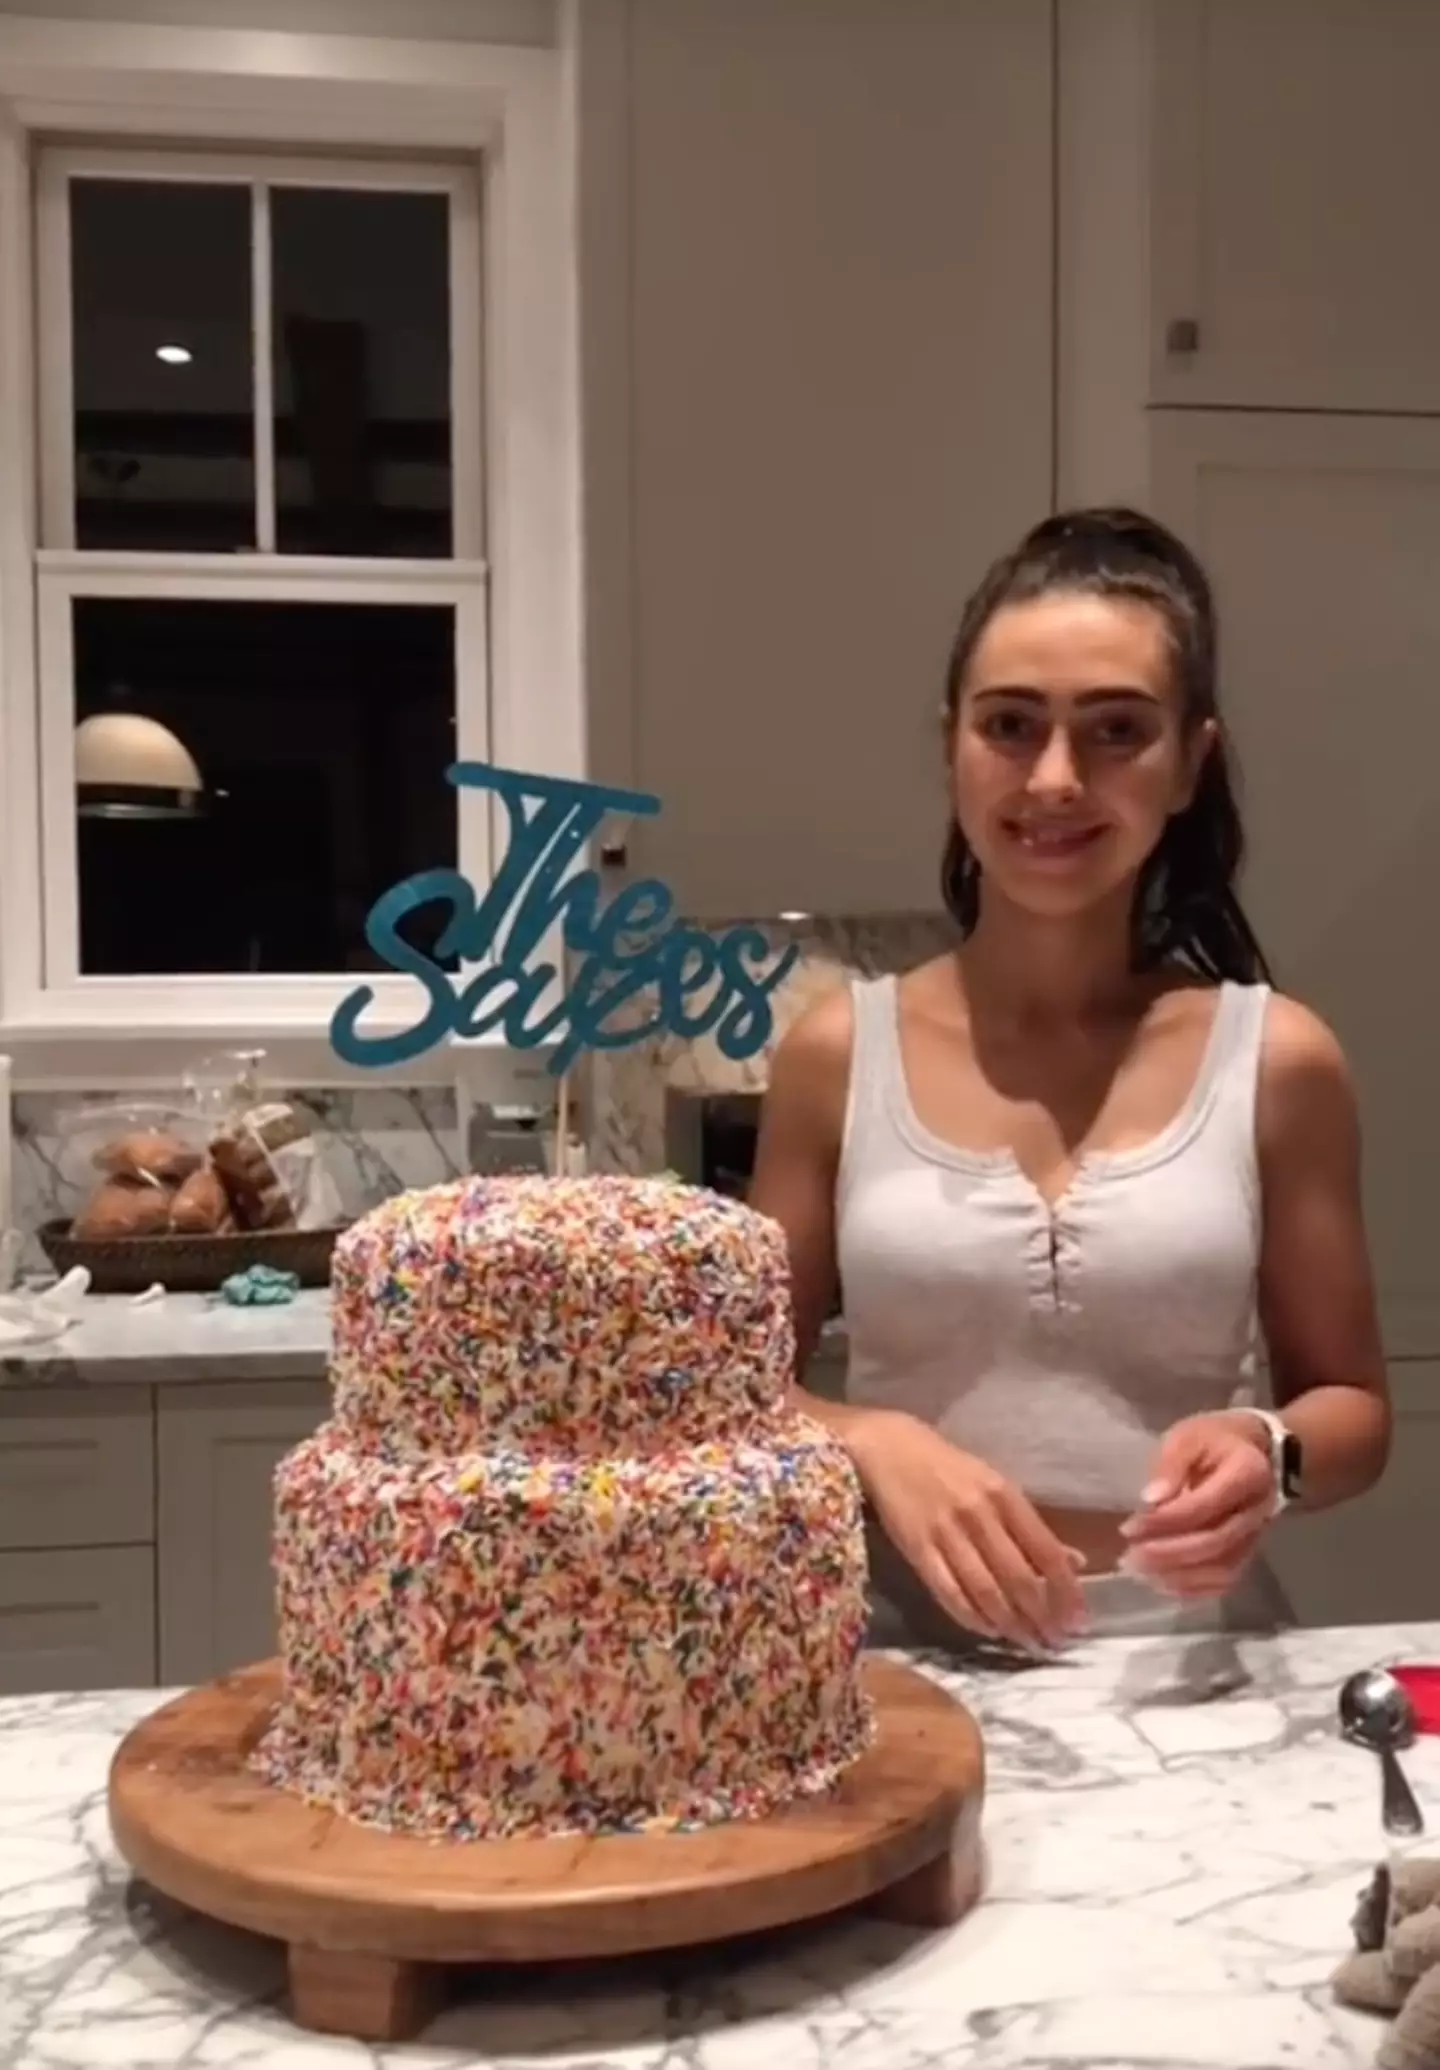 Laura finished the cake just hours before her big day. (TikTok/@darlinggoose)